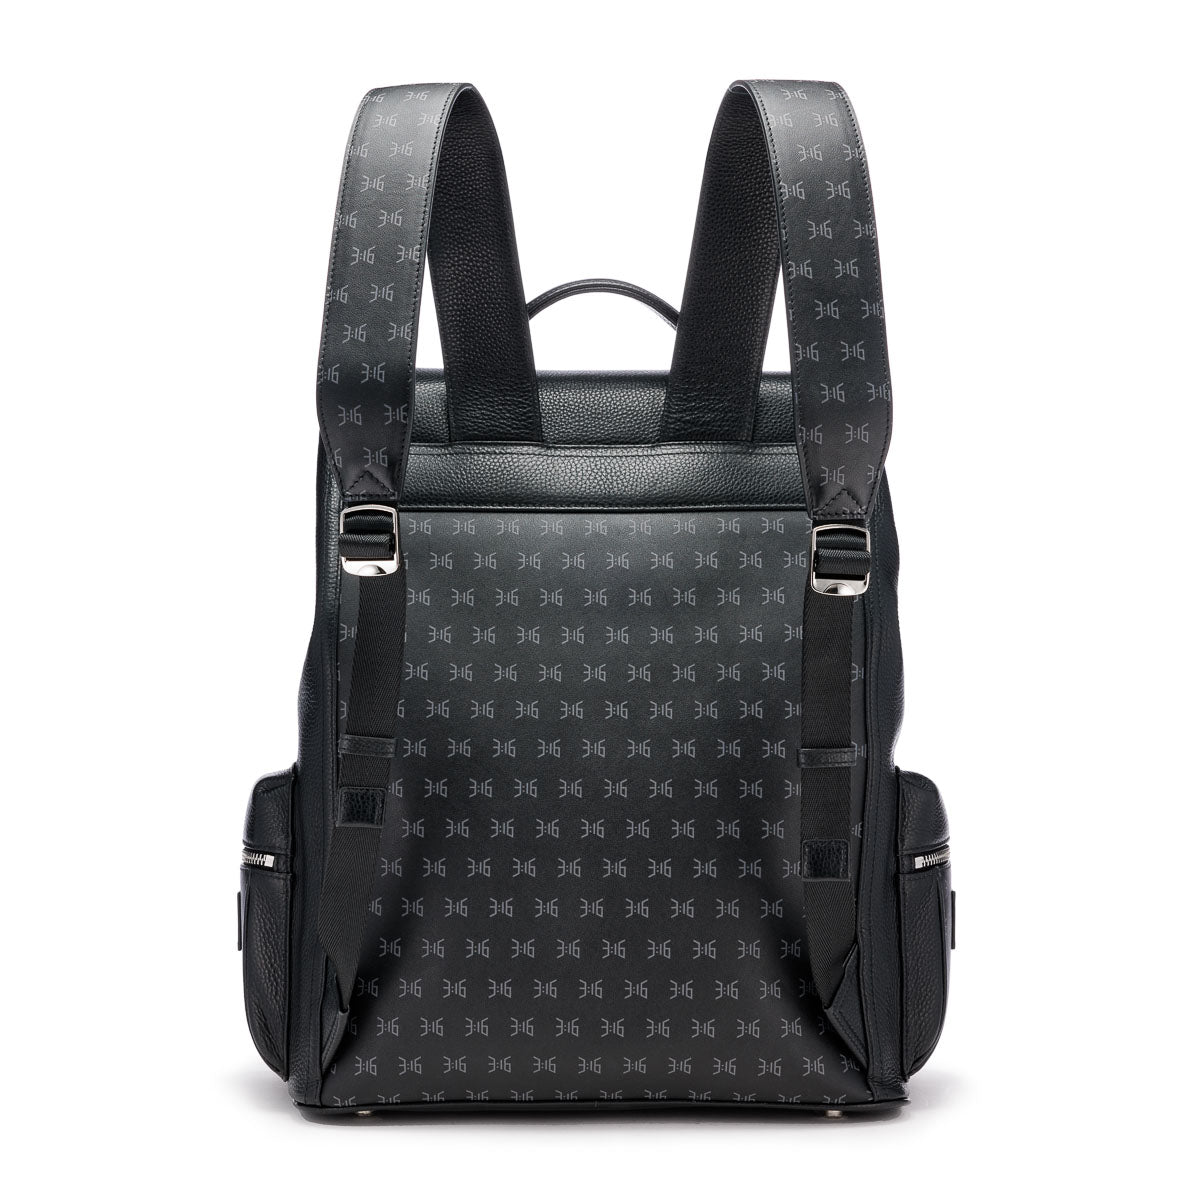 3:16 Collection - Luxury Top Grain Leather Backpack